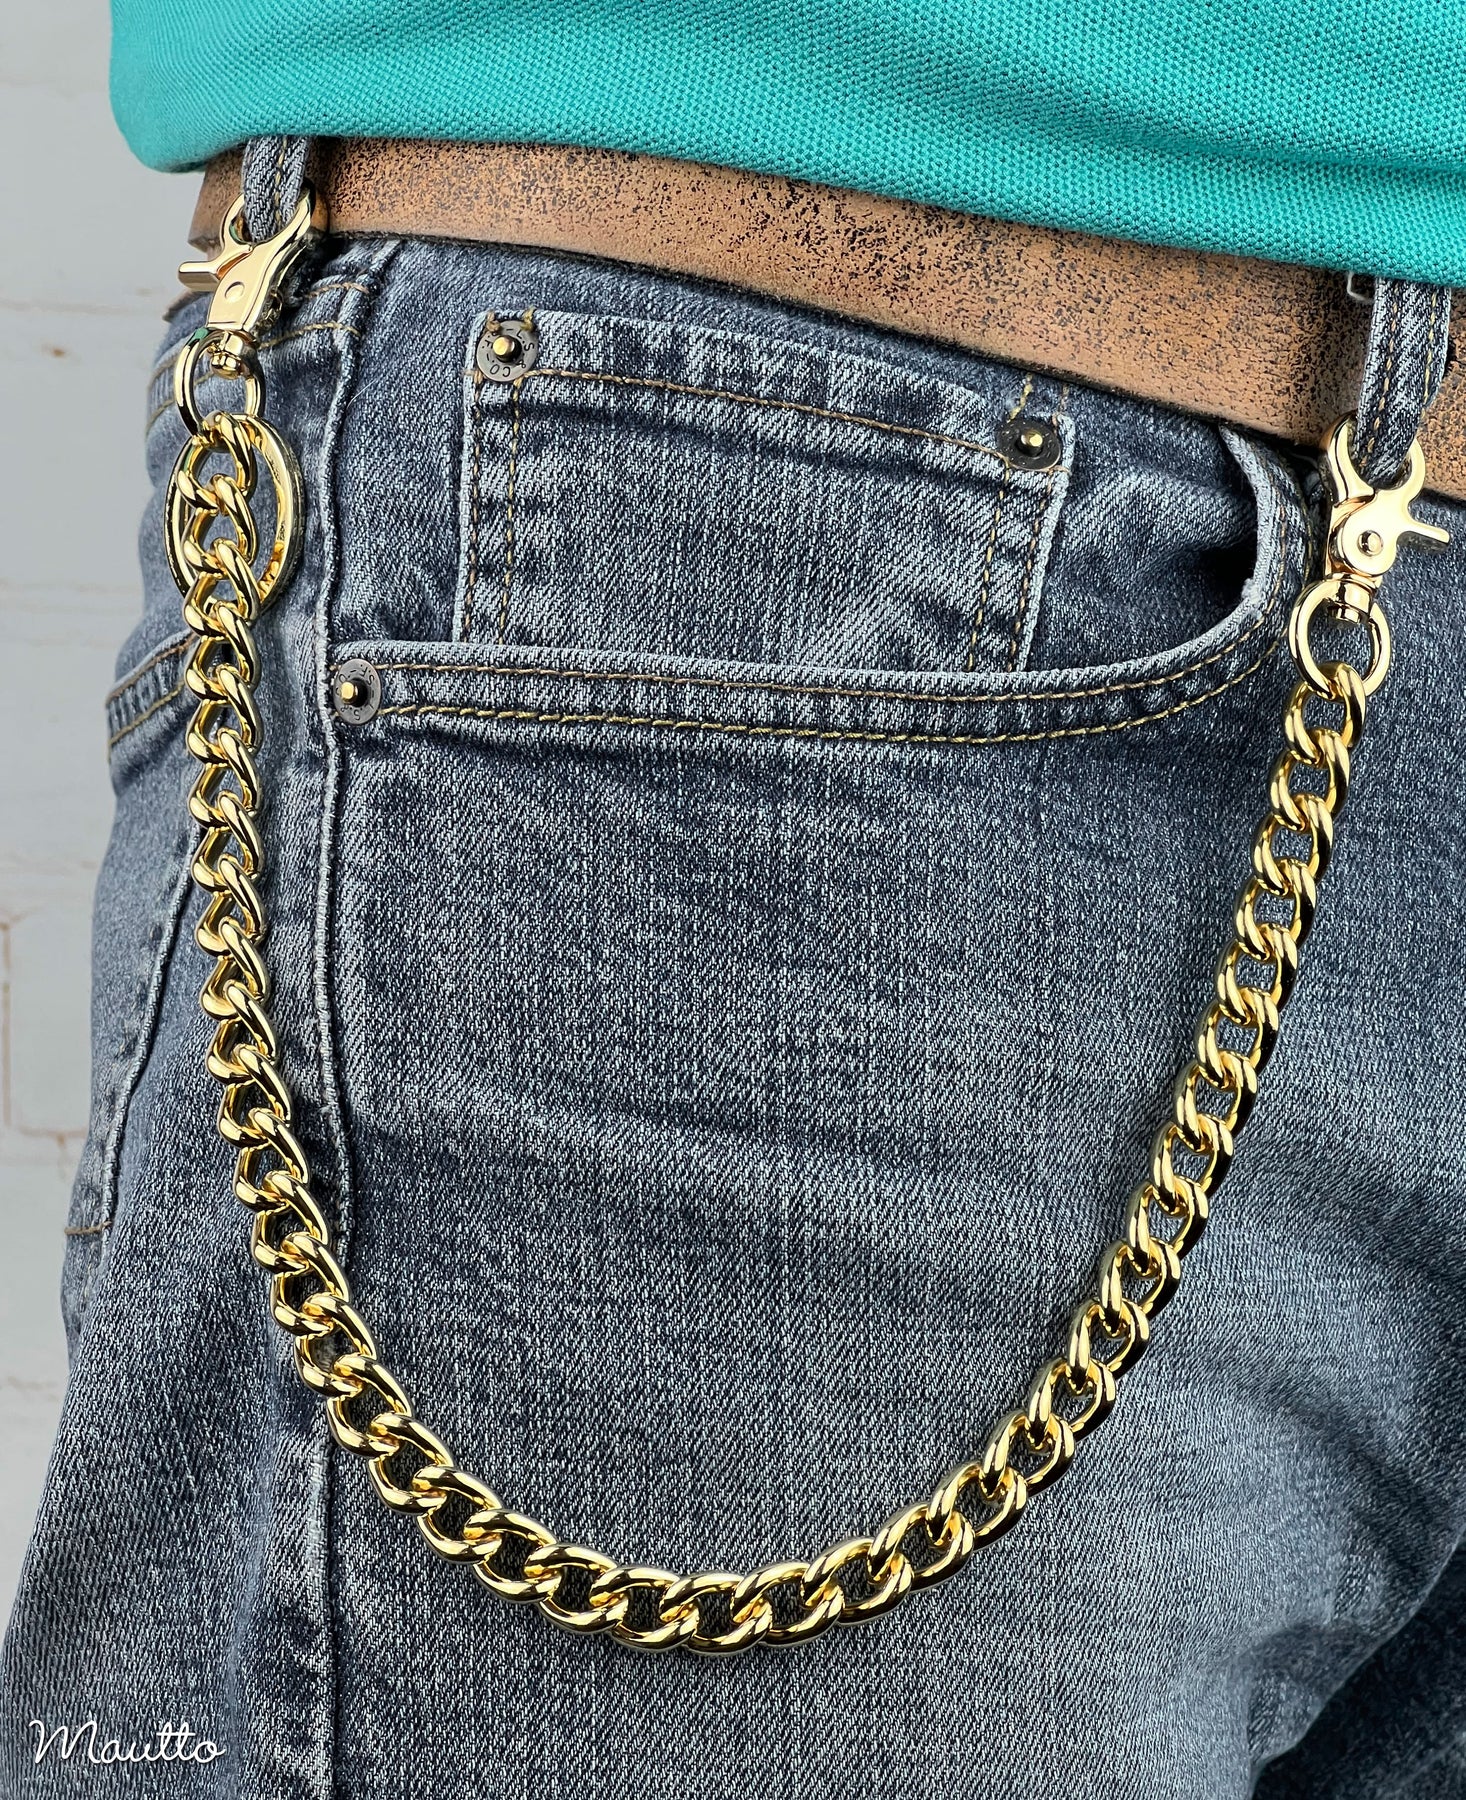 Mautto Wallet Chain / Key Tether - Standard & Long Lengths, Removable Keyring Long - 27 Inches / Gold-Tone